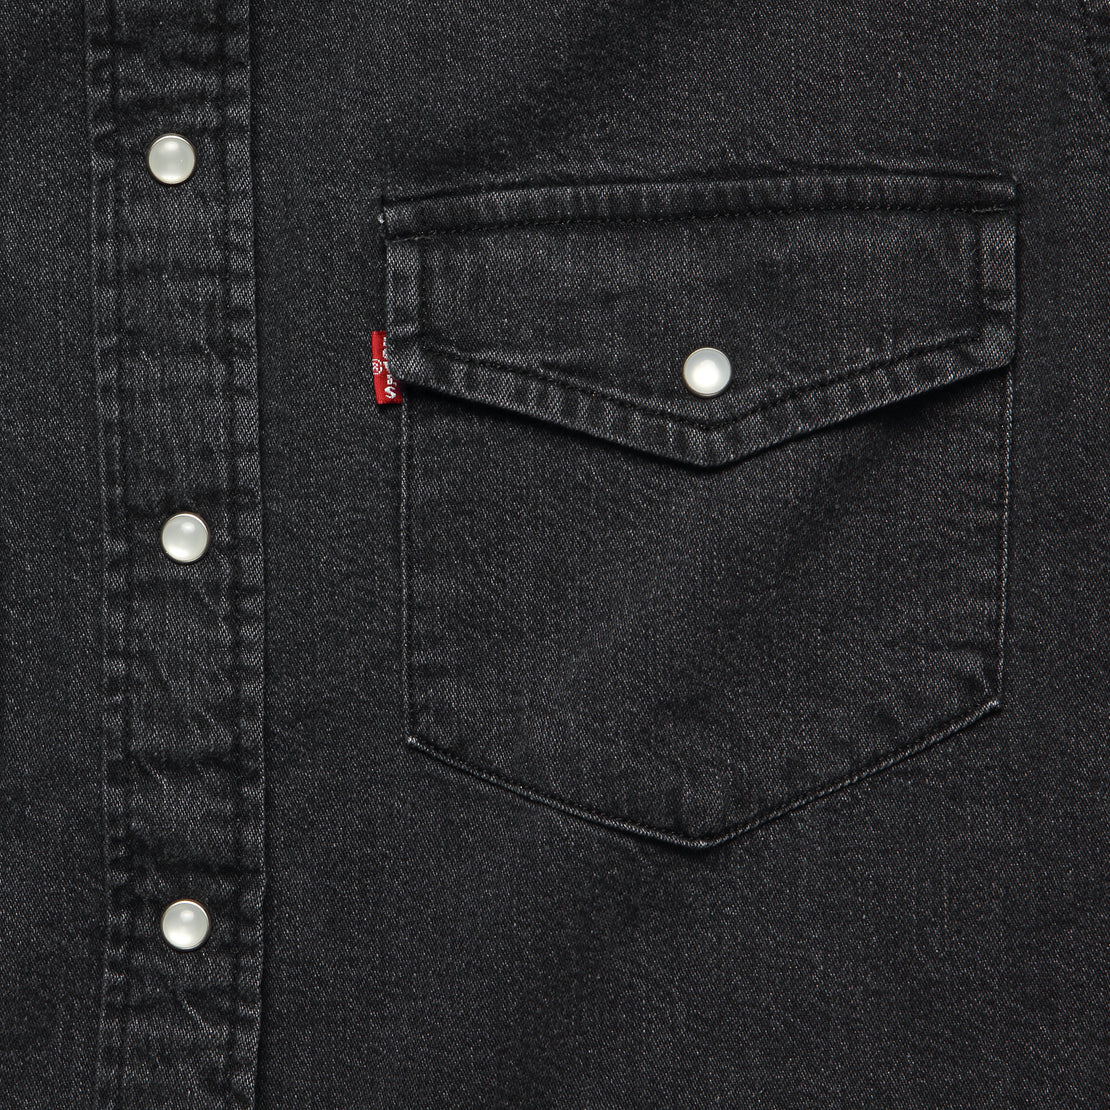 Essential Western Shirt - Black Sheep - Levis Premium - STAG Provisions - W - Tops - L/S Woven